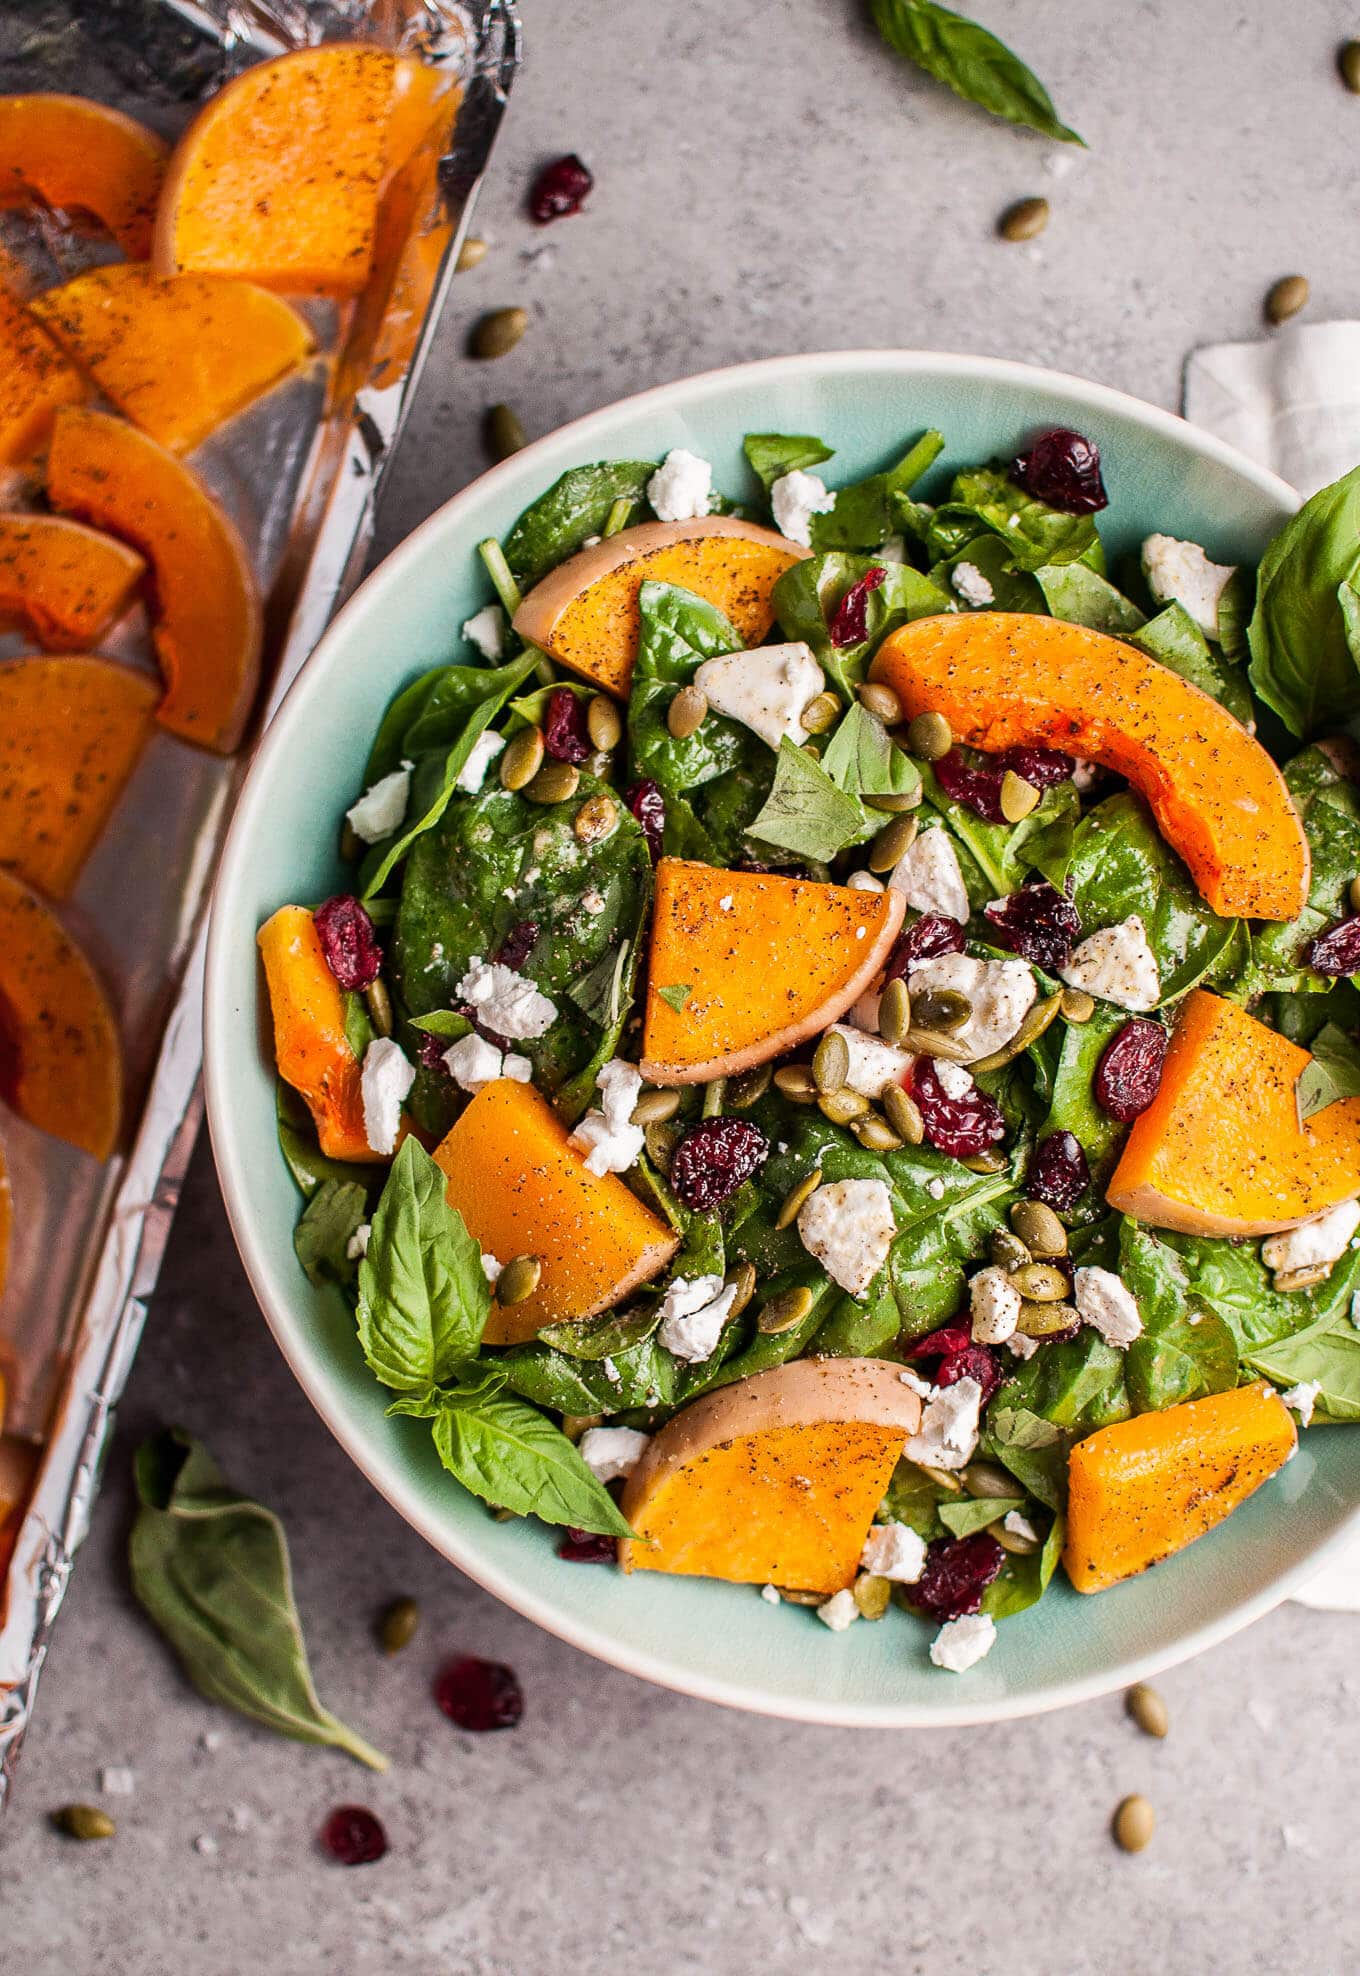 Roasted Butternut Squash Spinach Salad with Goat’s Cheese via Salt & Lavender